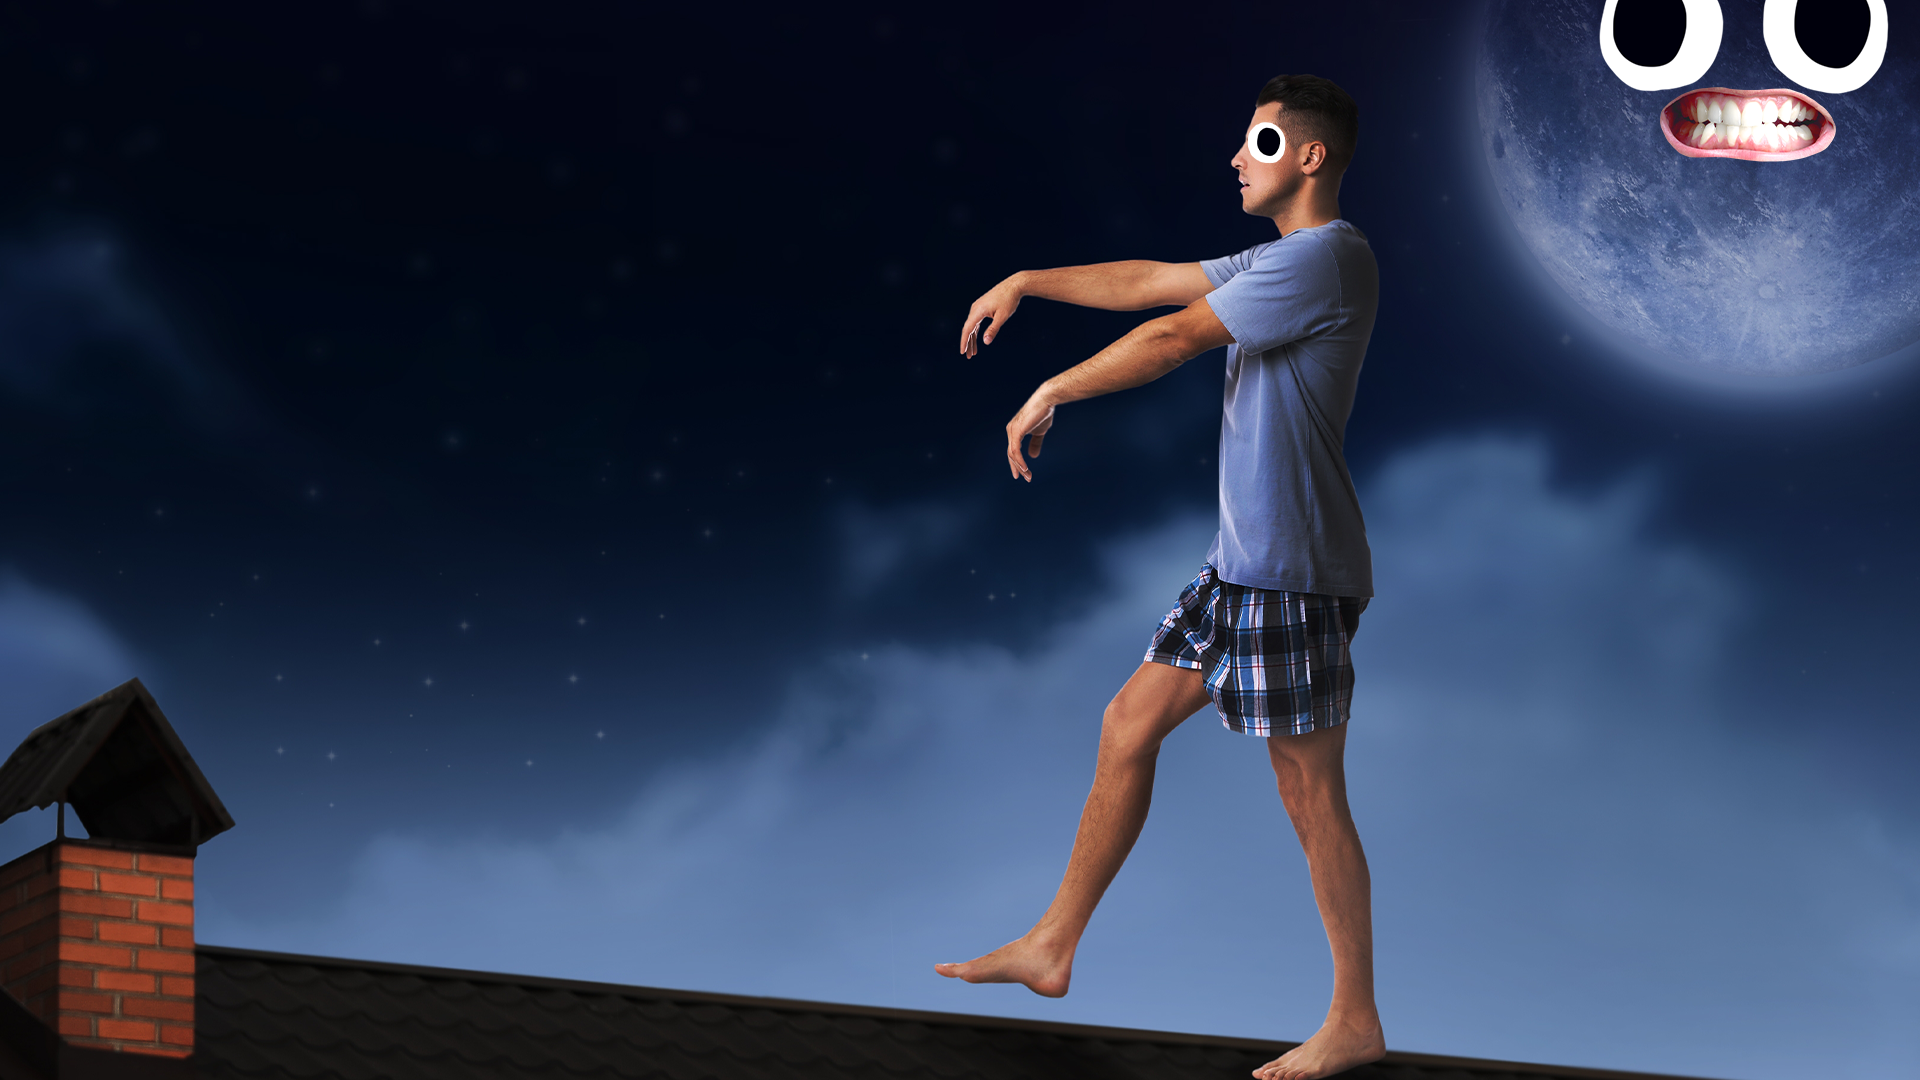 Man sleep walking while concerned moon watches